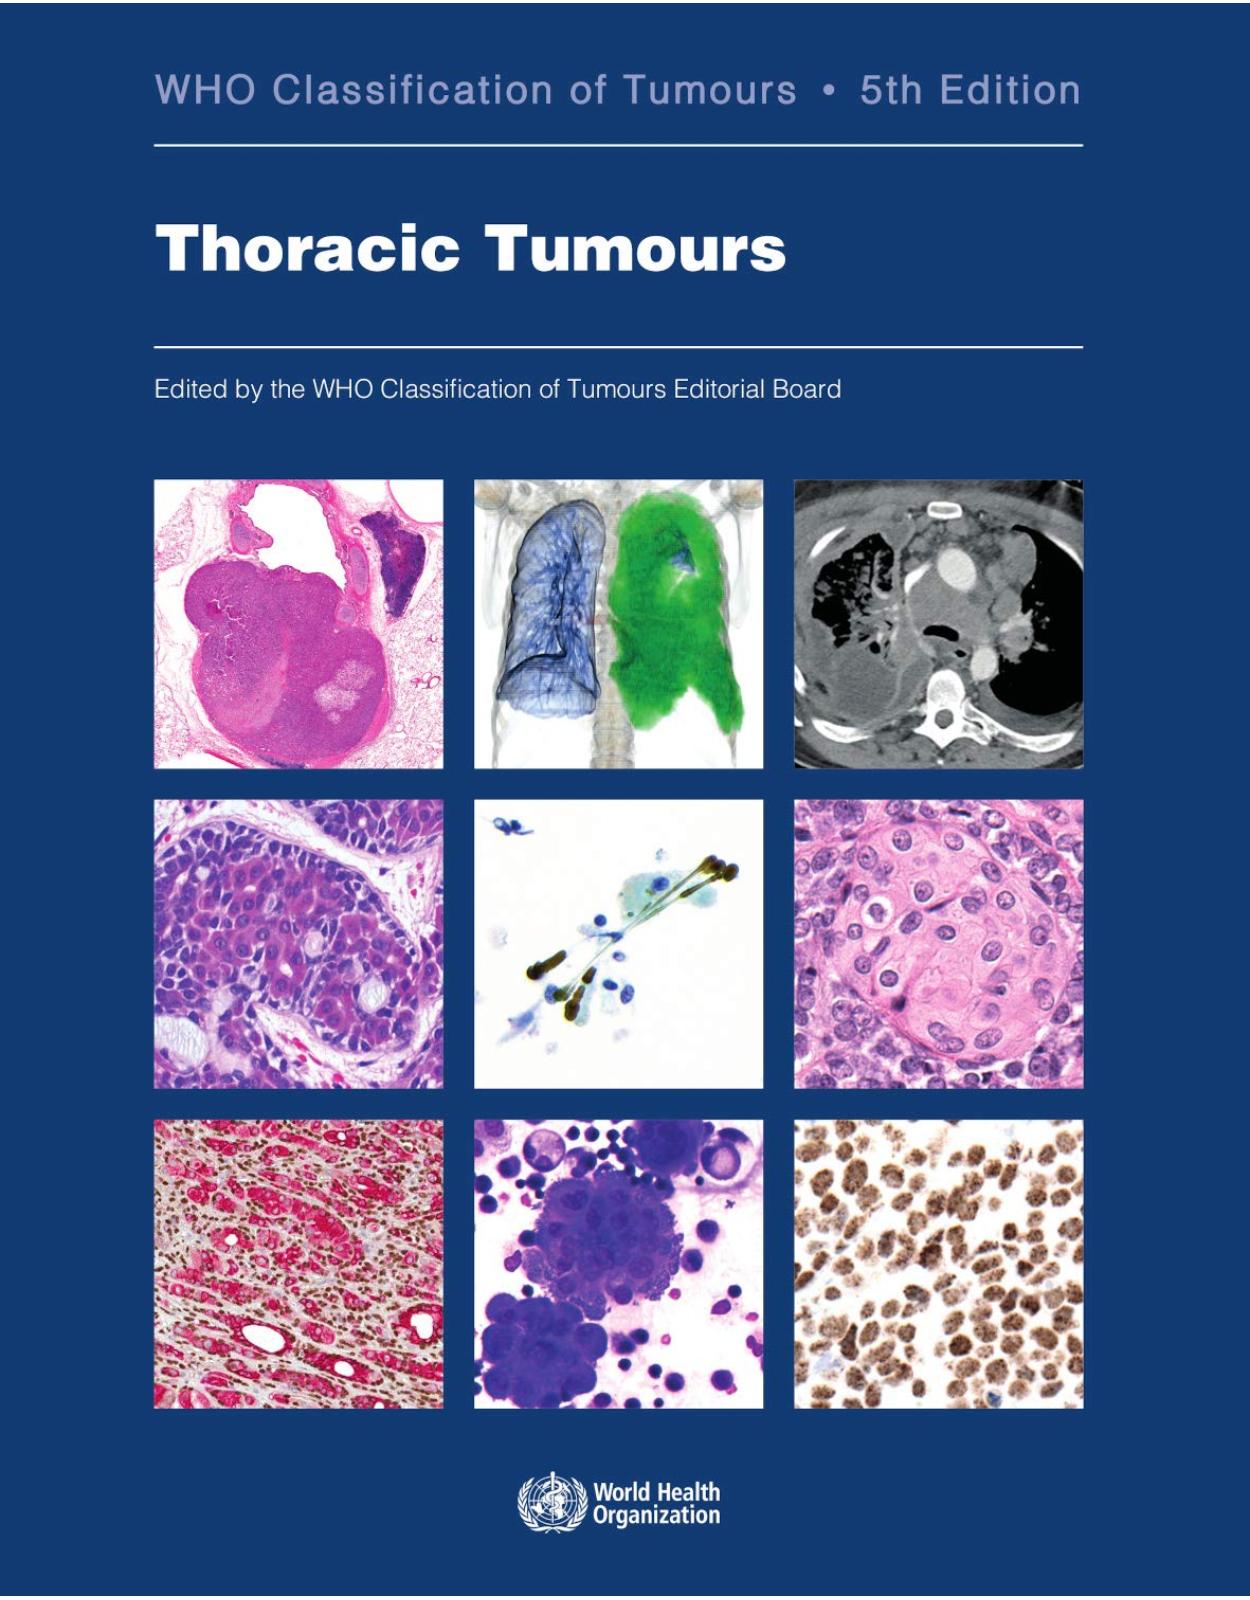 Thoracic tumours: Who Classification of Tumours 